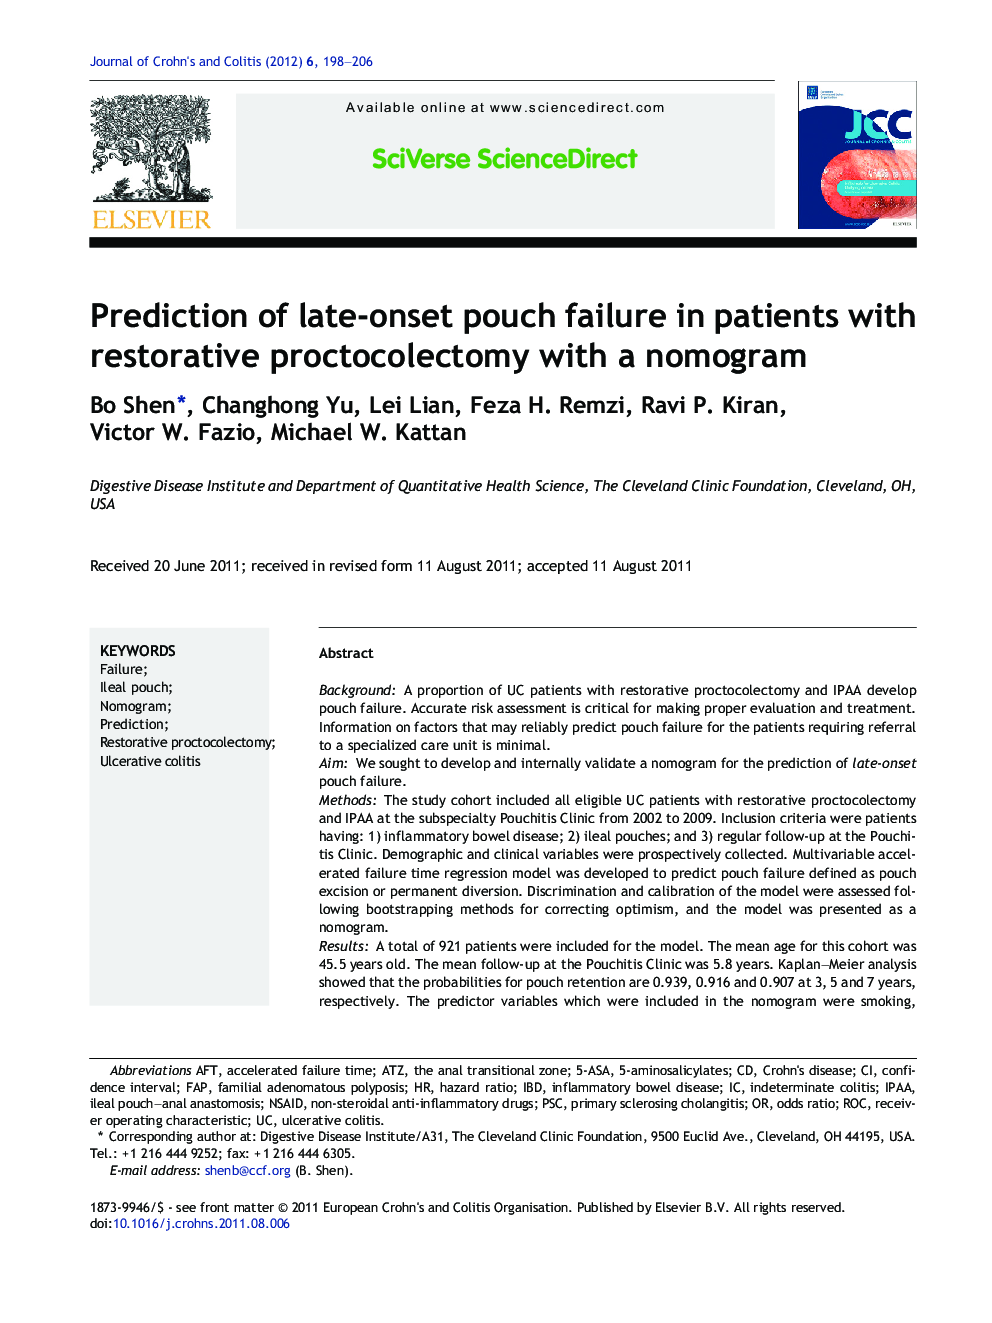 Prediction of late-onset pouch failure in patients with restorative proctocolectomy with a nomogram